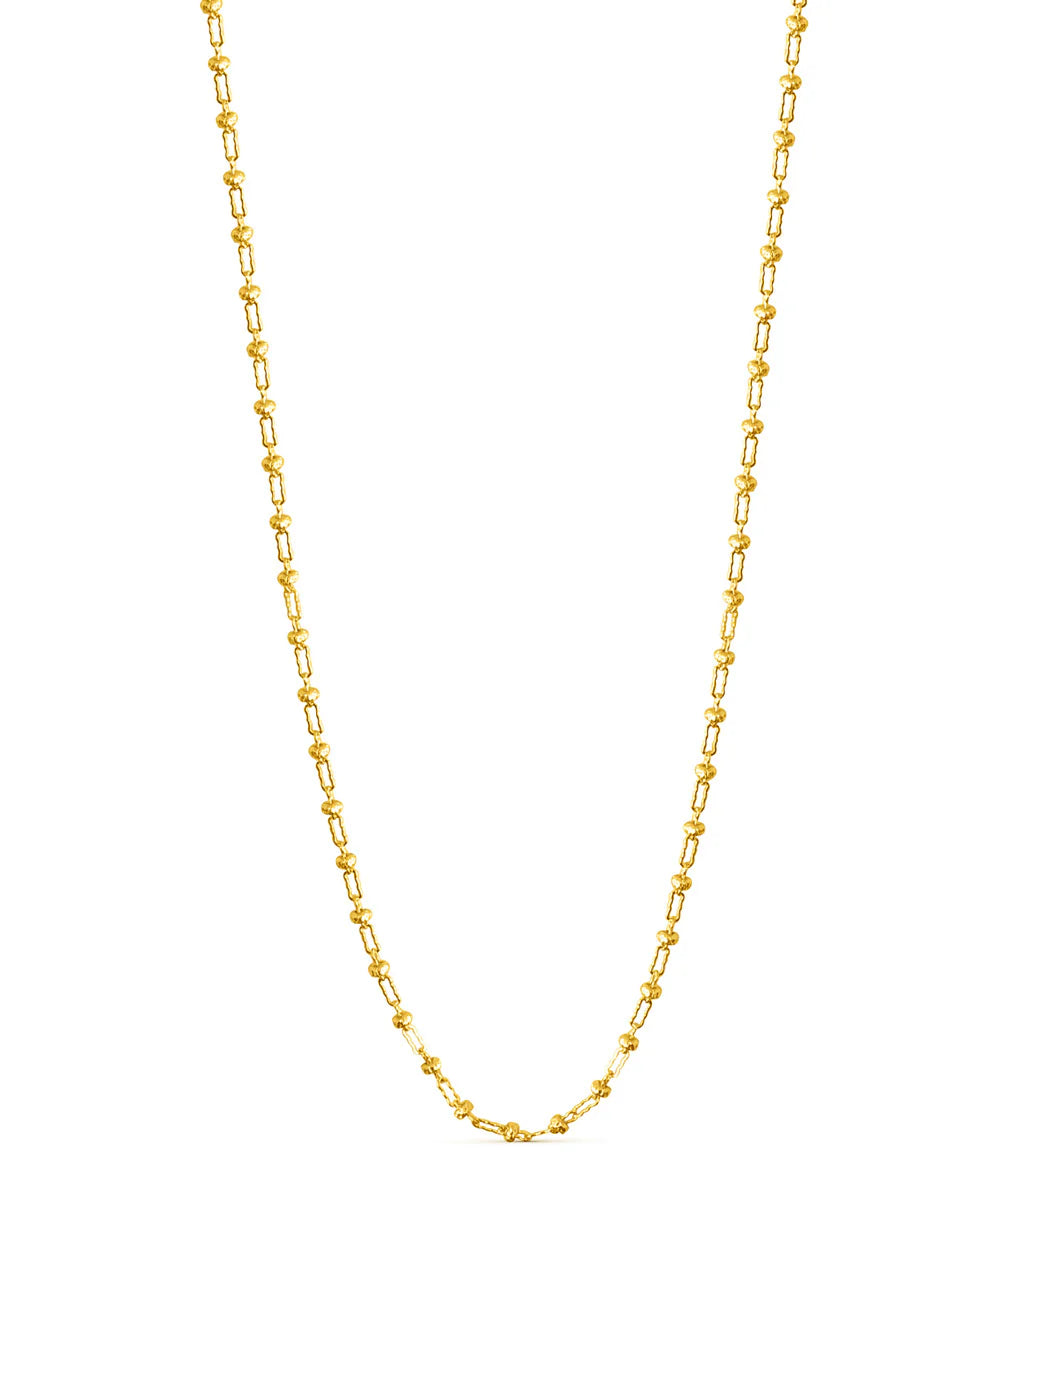 Callie Beaded Chain - Gold Plating